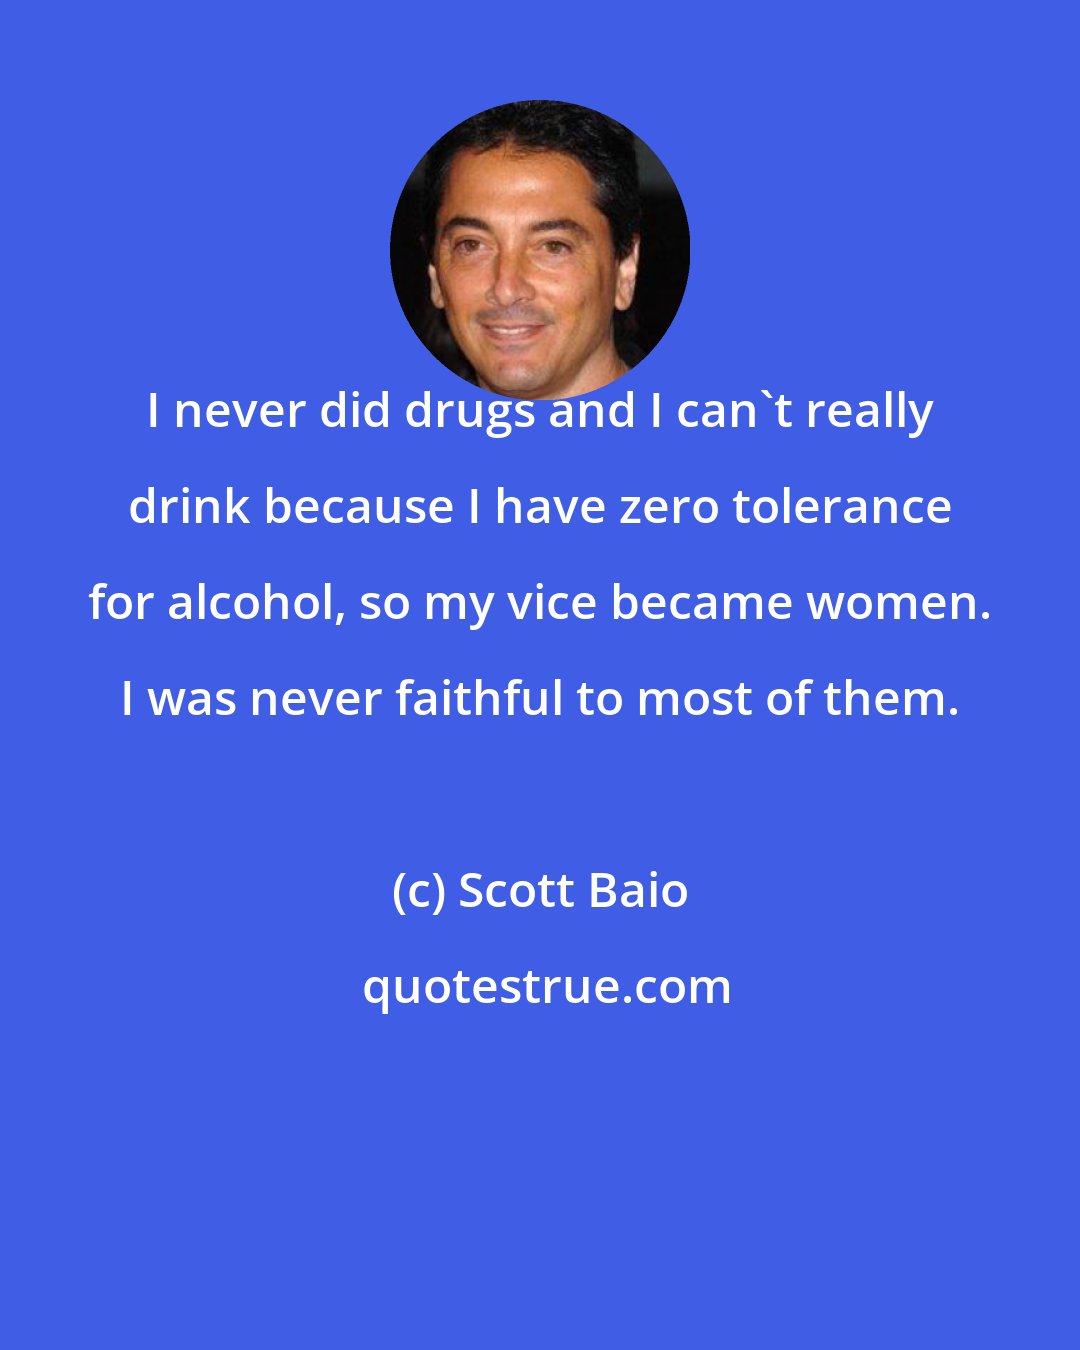 Scott Baio: I never did drugs and I can't really drink because I have zero tolerance for alcohol, so my vice became women. I was never faithful to most of them.